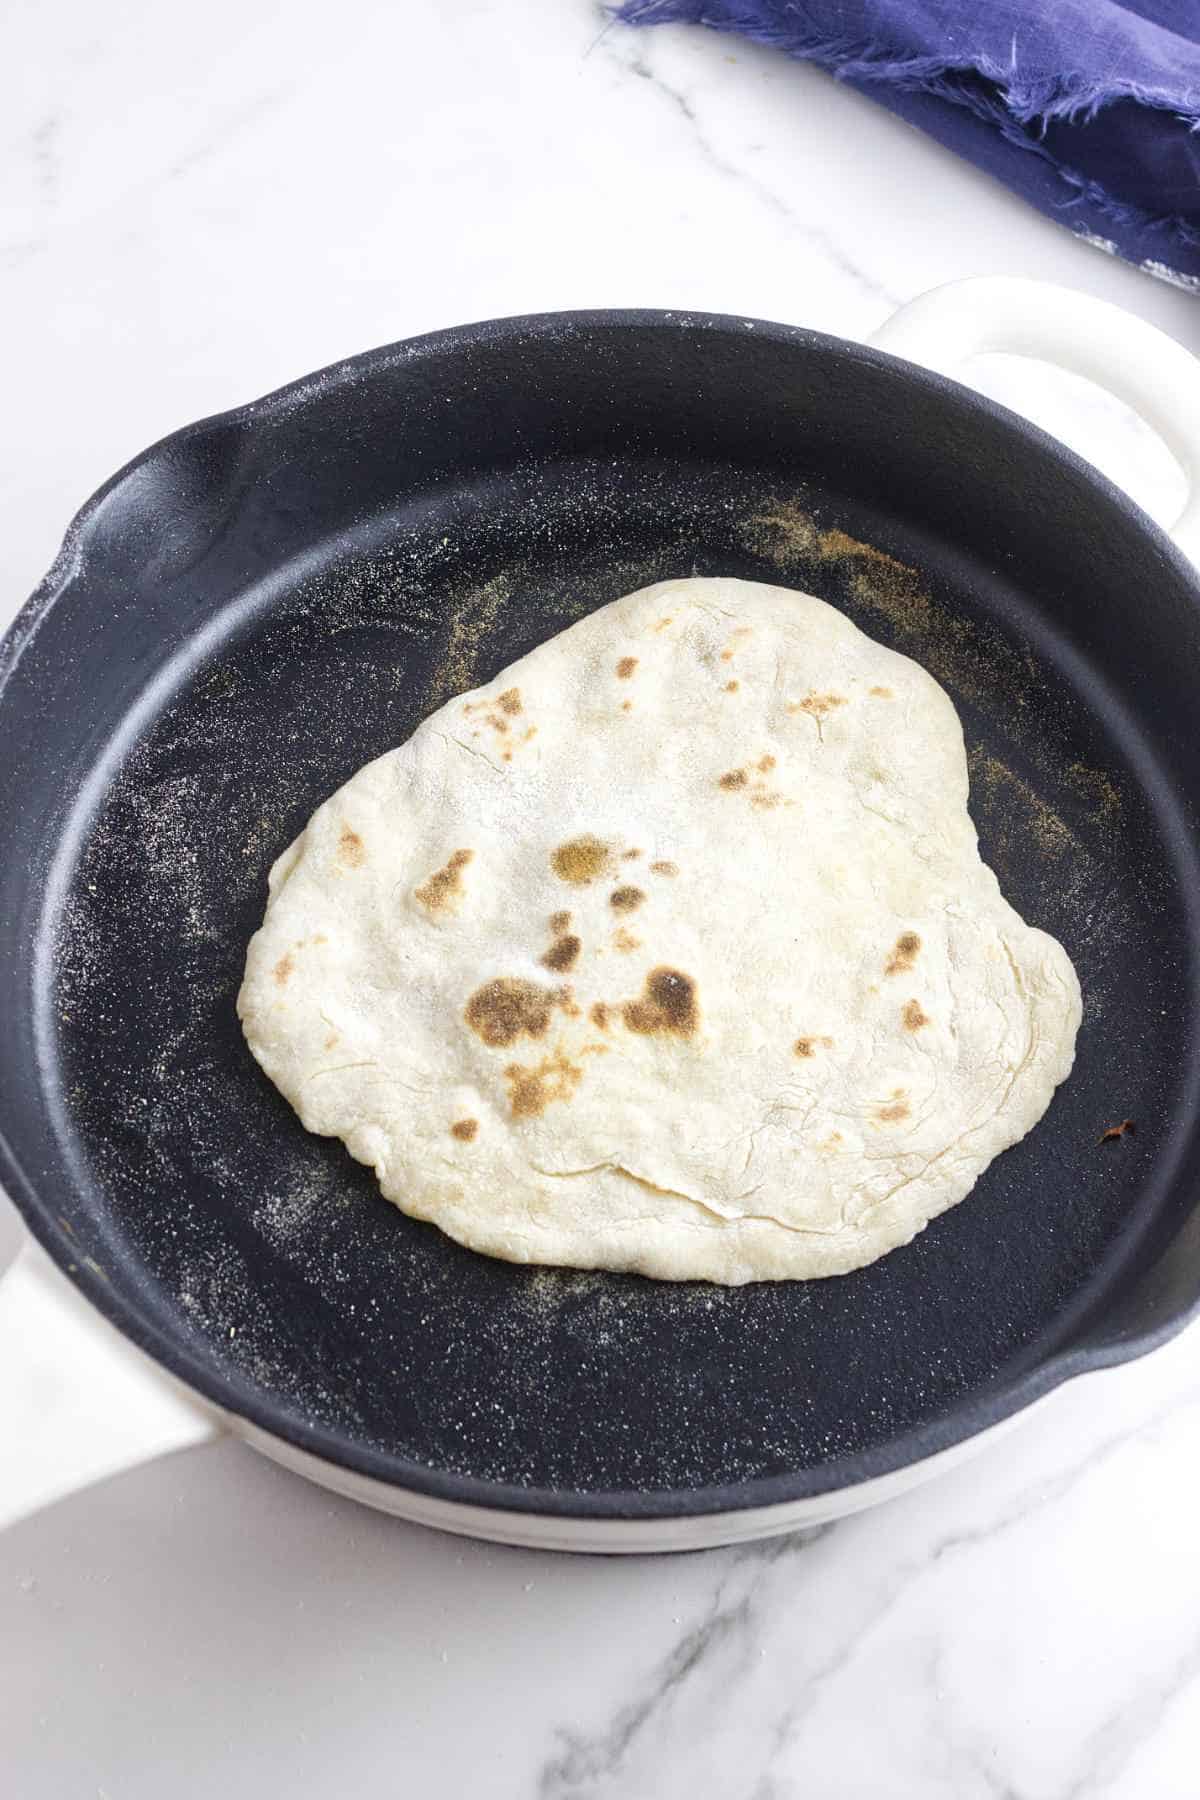 cooking naan in a hot cast iron skillet.